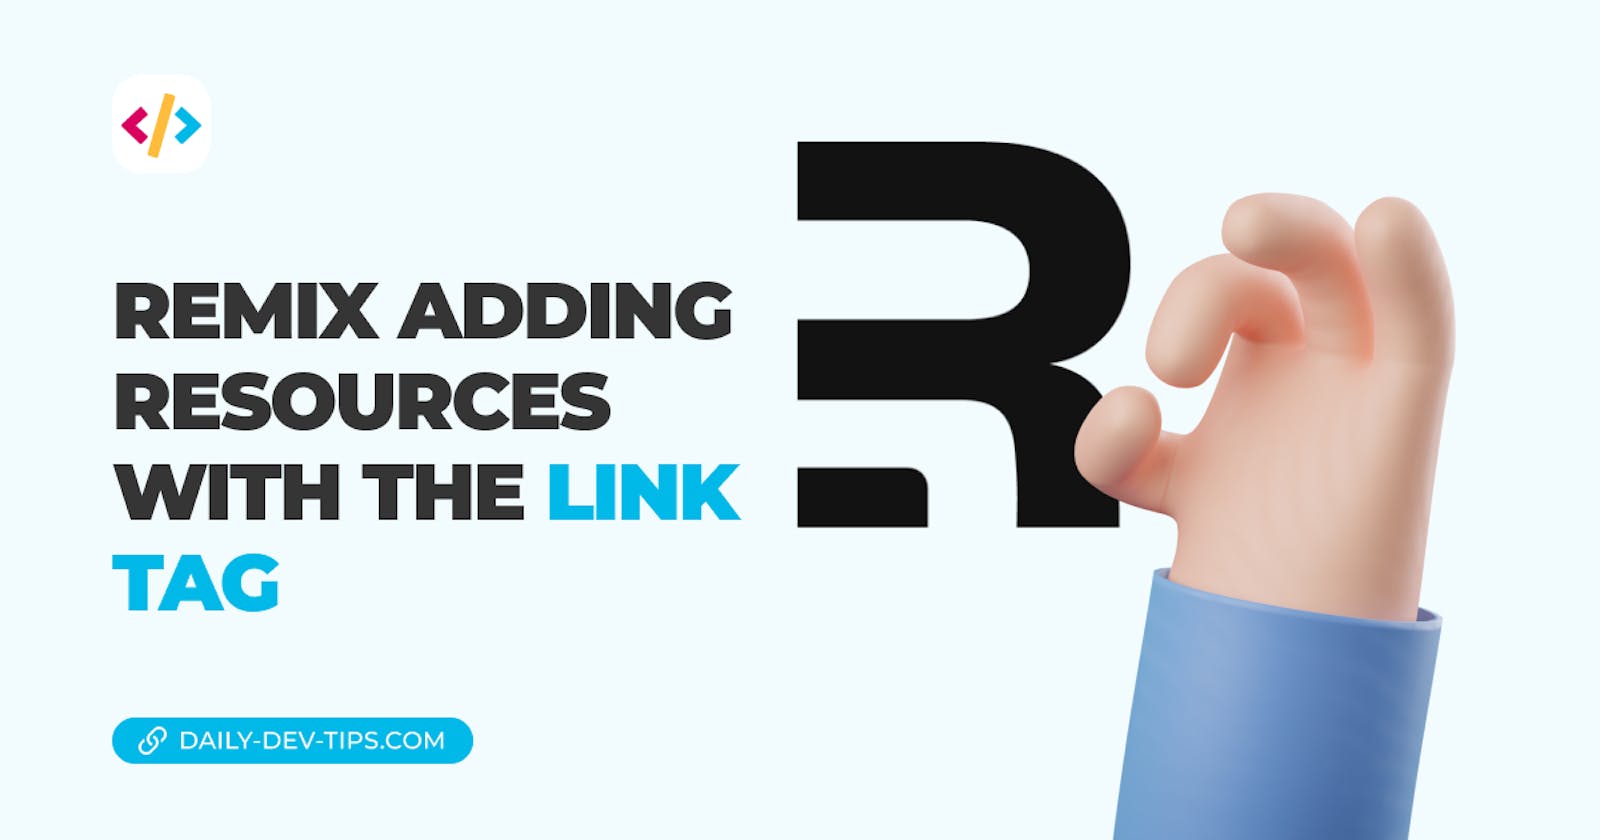 Remix adding resources with the link tag